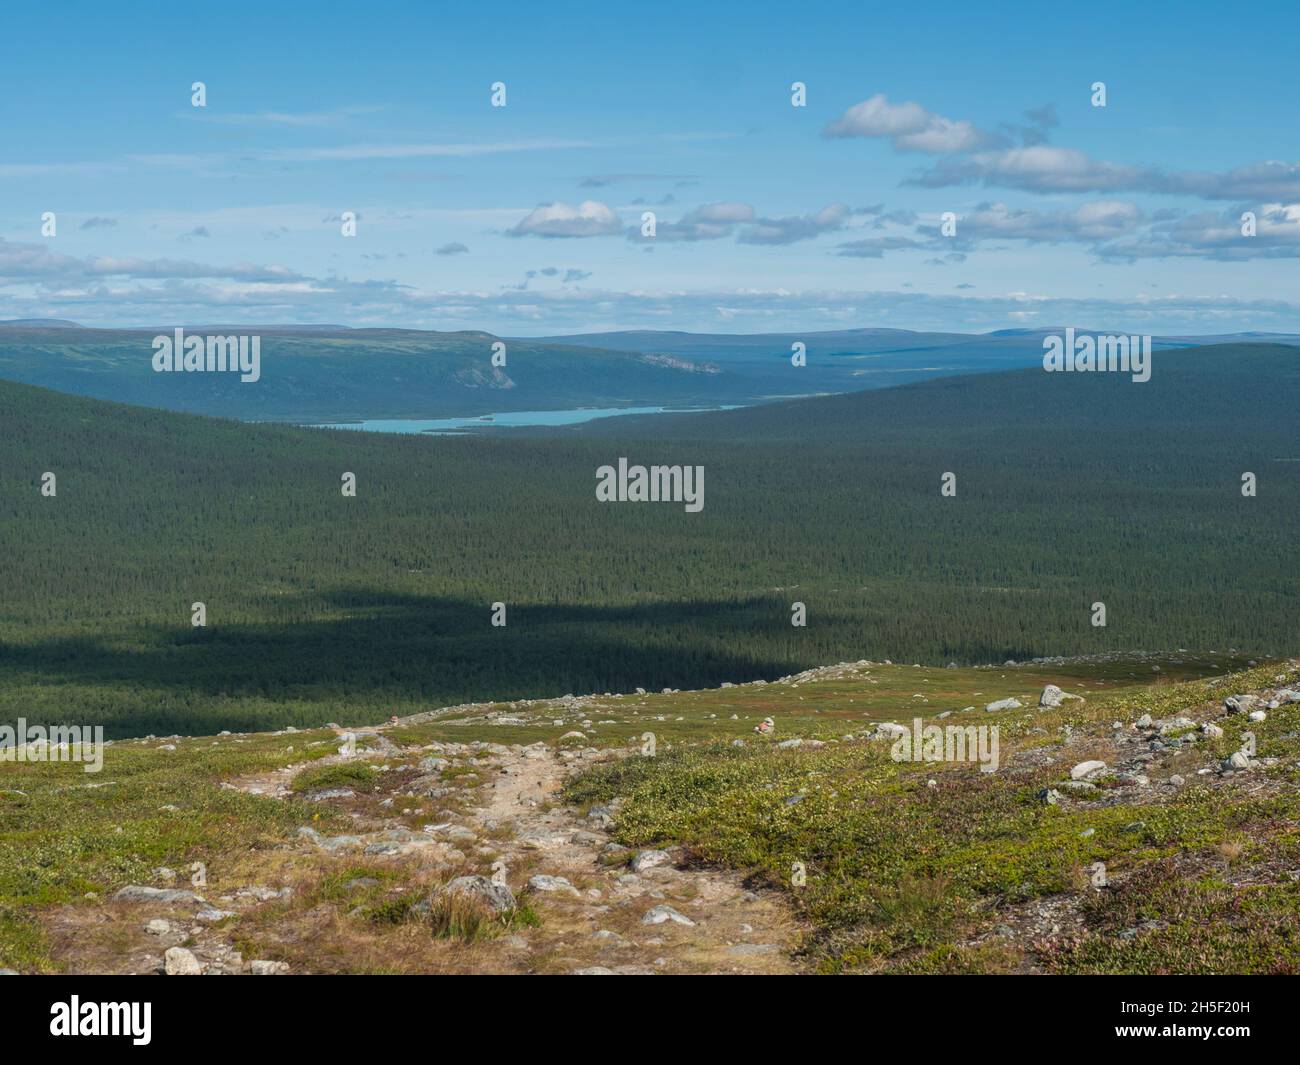 View on forest and milky green Laitaure, Lajtavrre lake from Kungsleden hiking trail in Sarek national park, Sweden Lapland. Wild landscape with Stock Photo